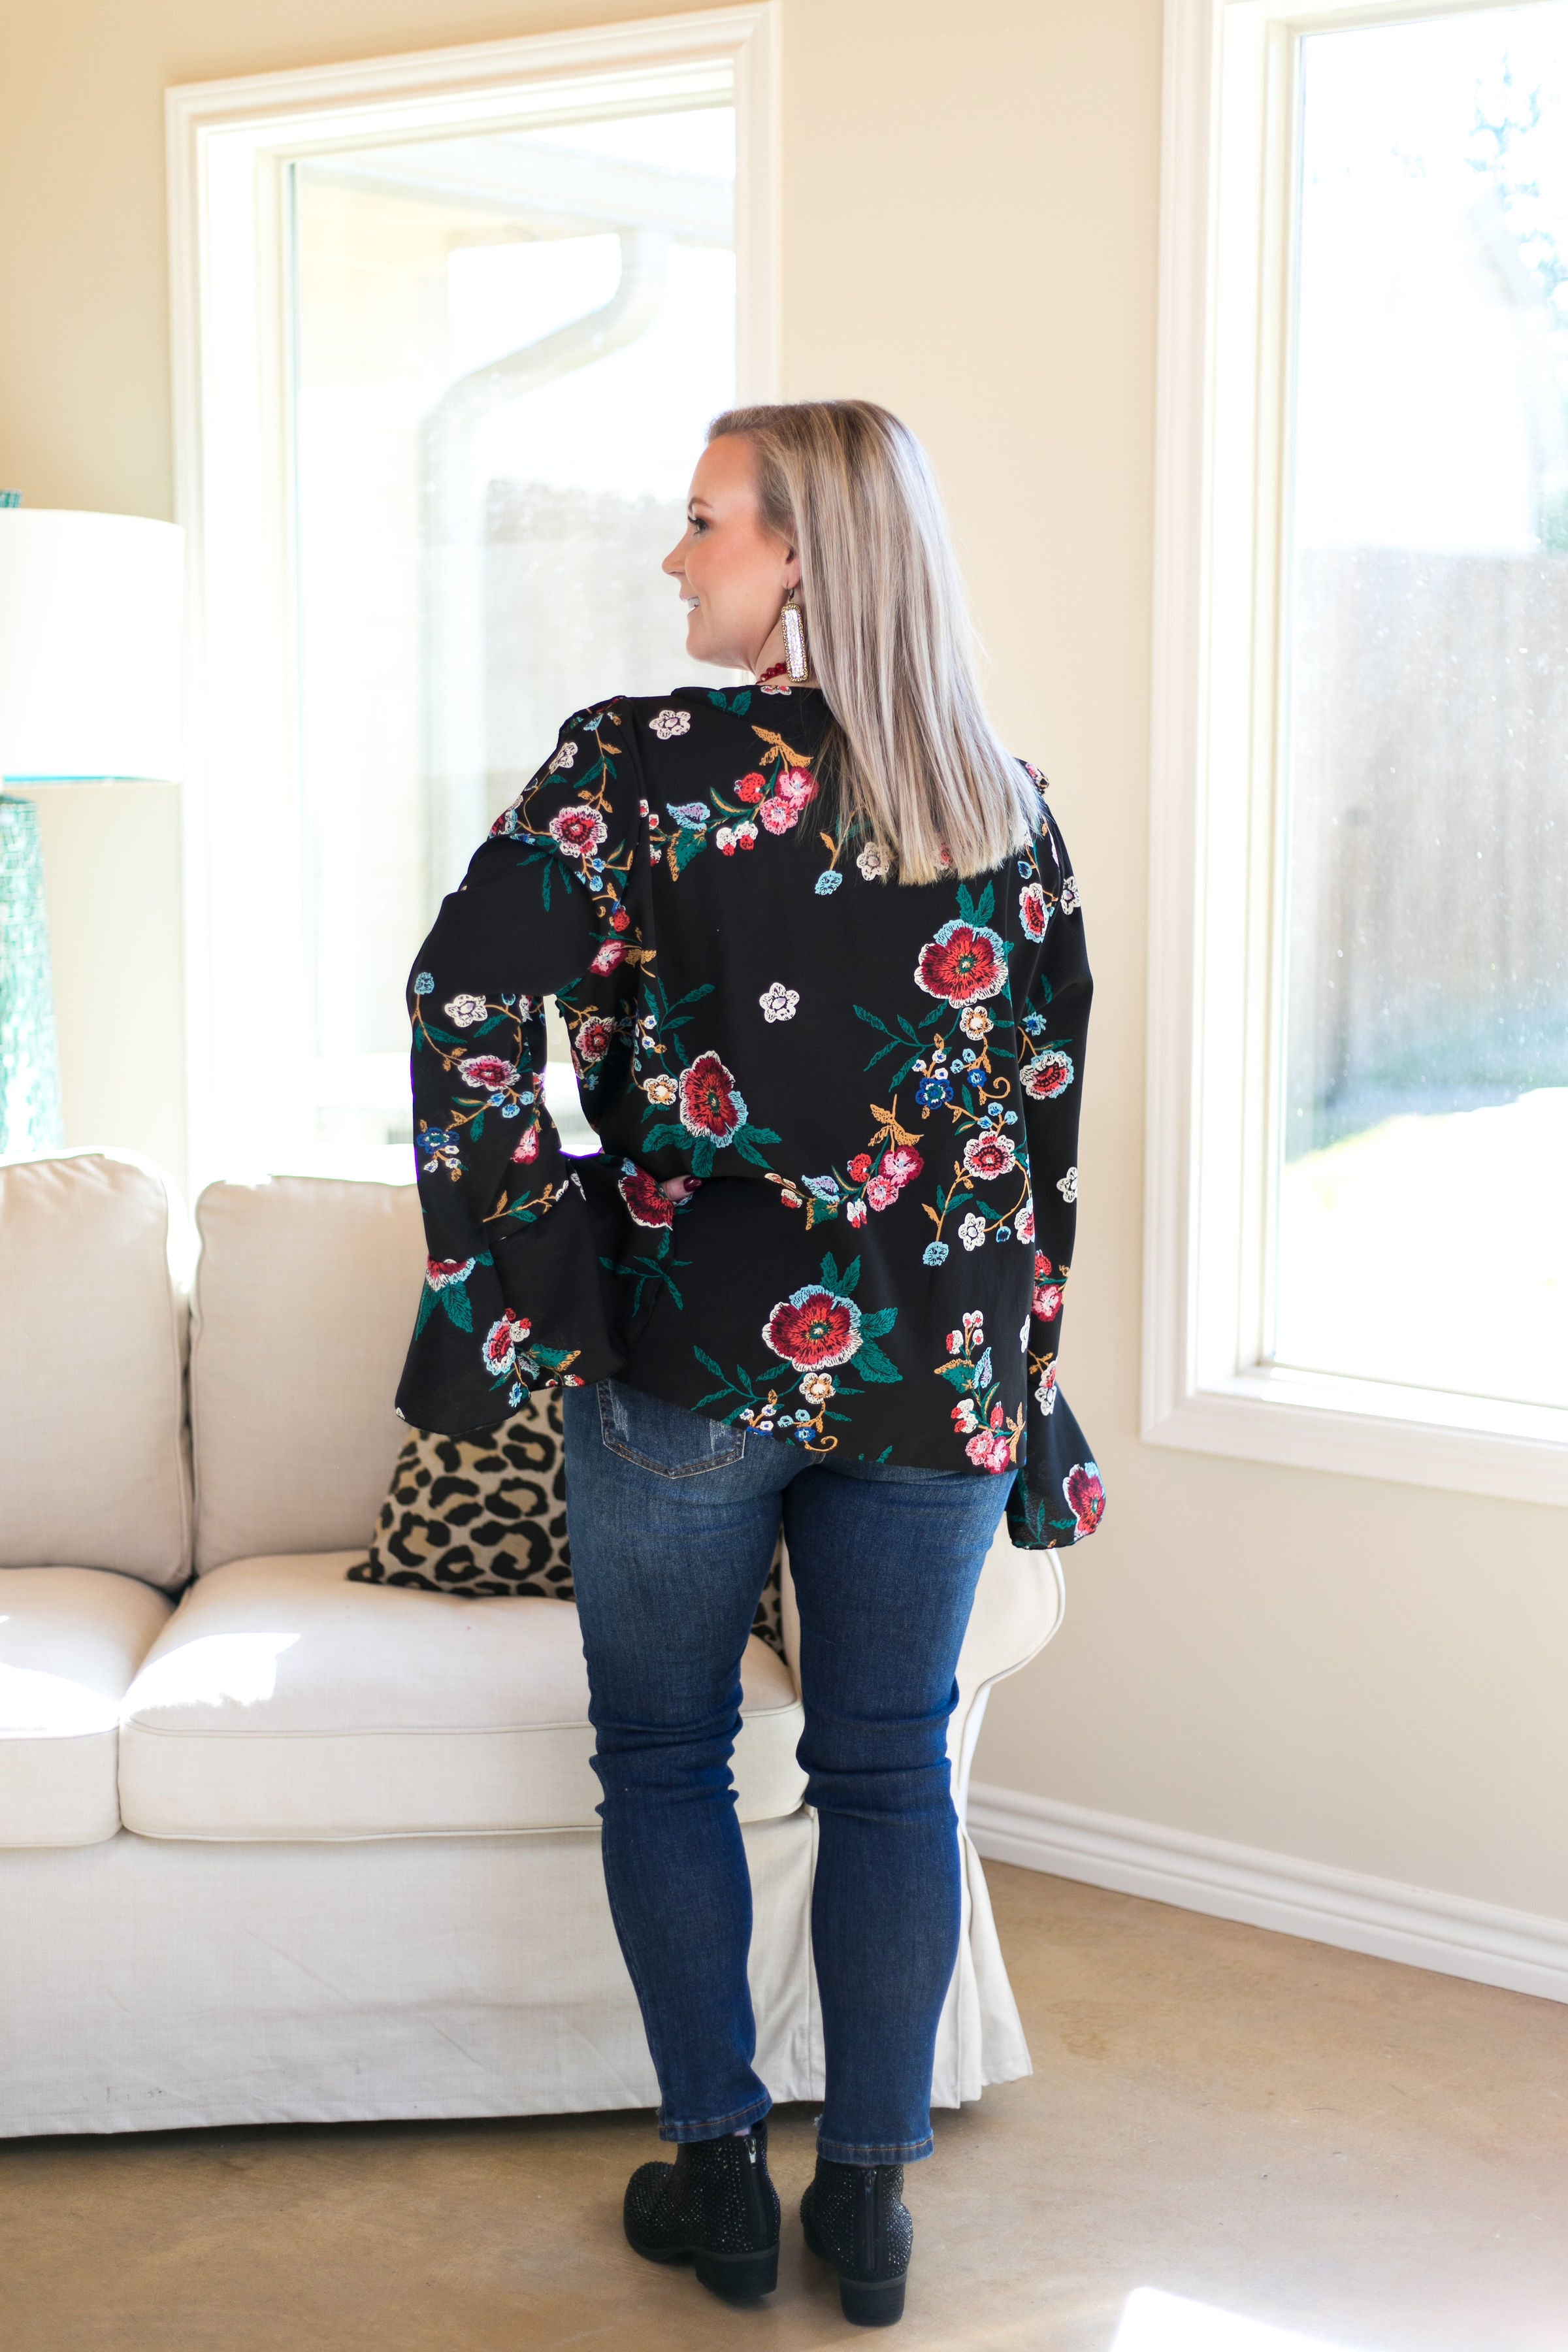 Last Chance Size Small | Bring It Here Floral Ruffle Blouse in Black - Giddy Up Glamour Boutique